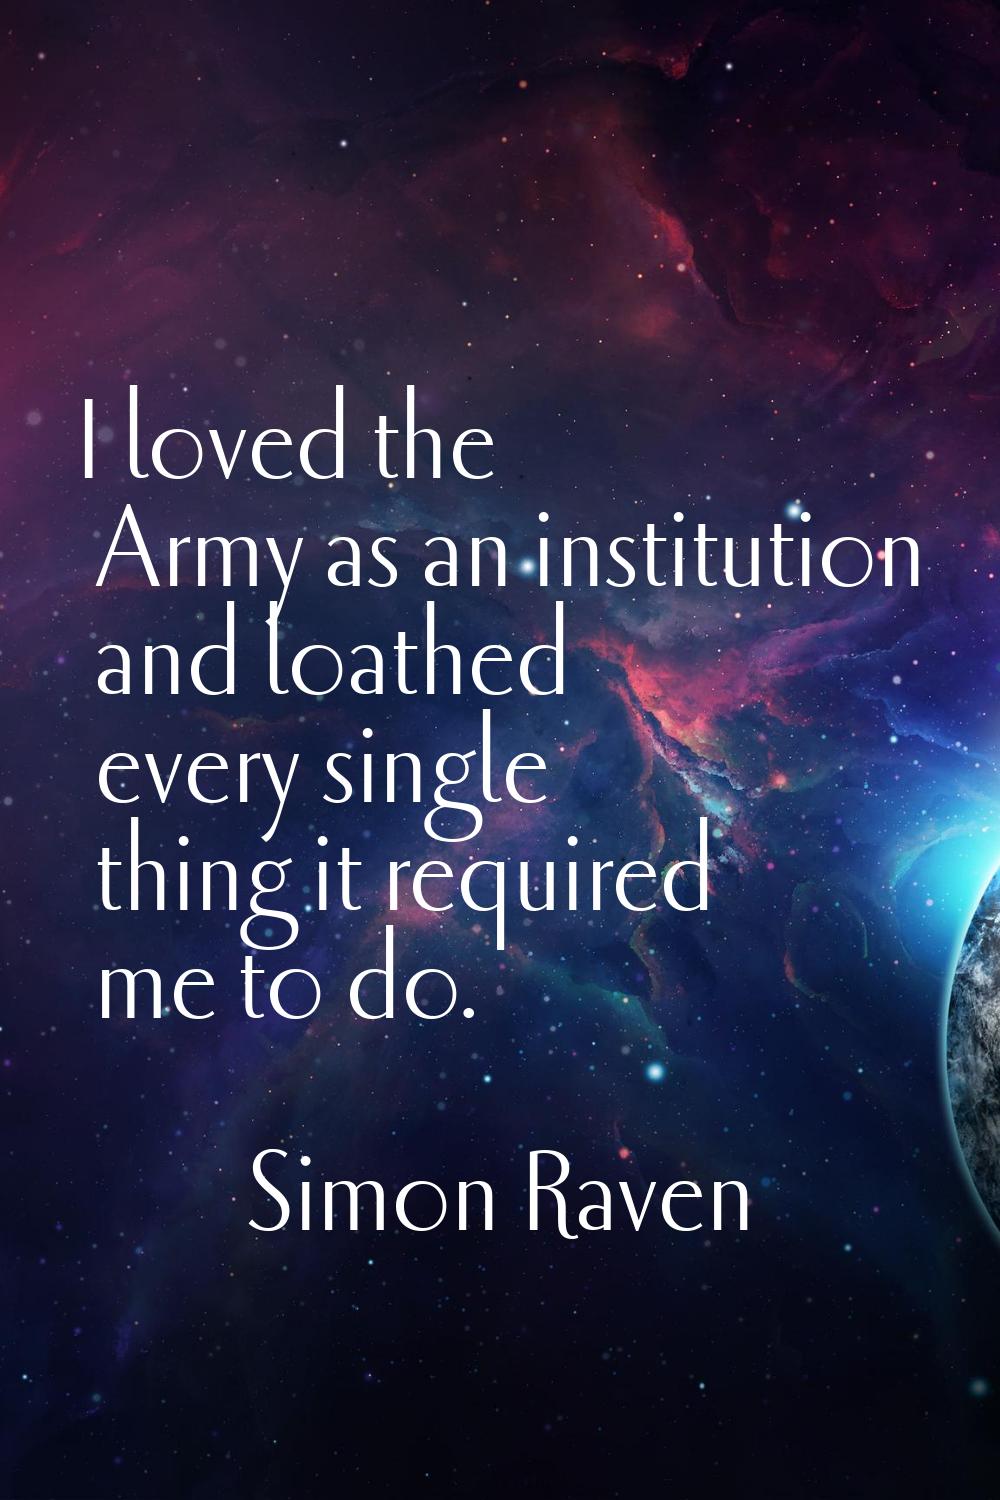 I loved the Army as an institution and loathed every single thing it required me to do.